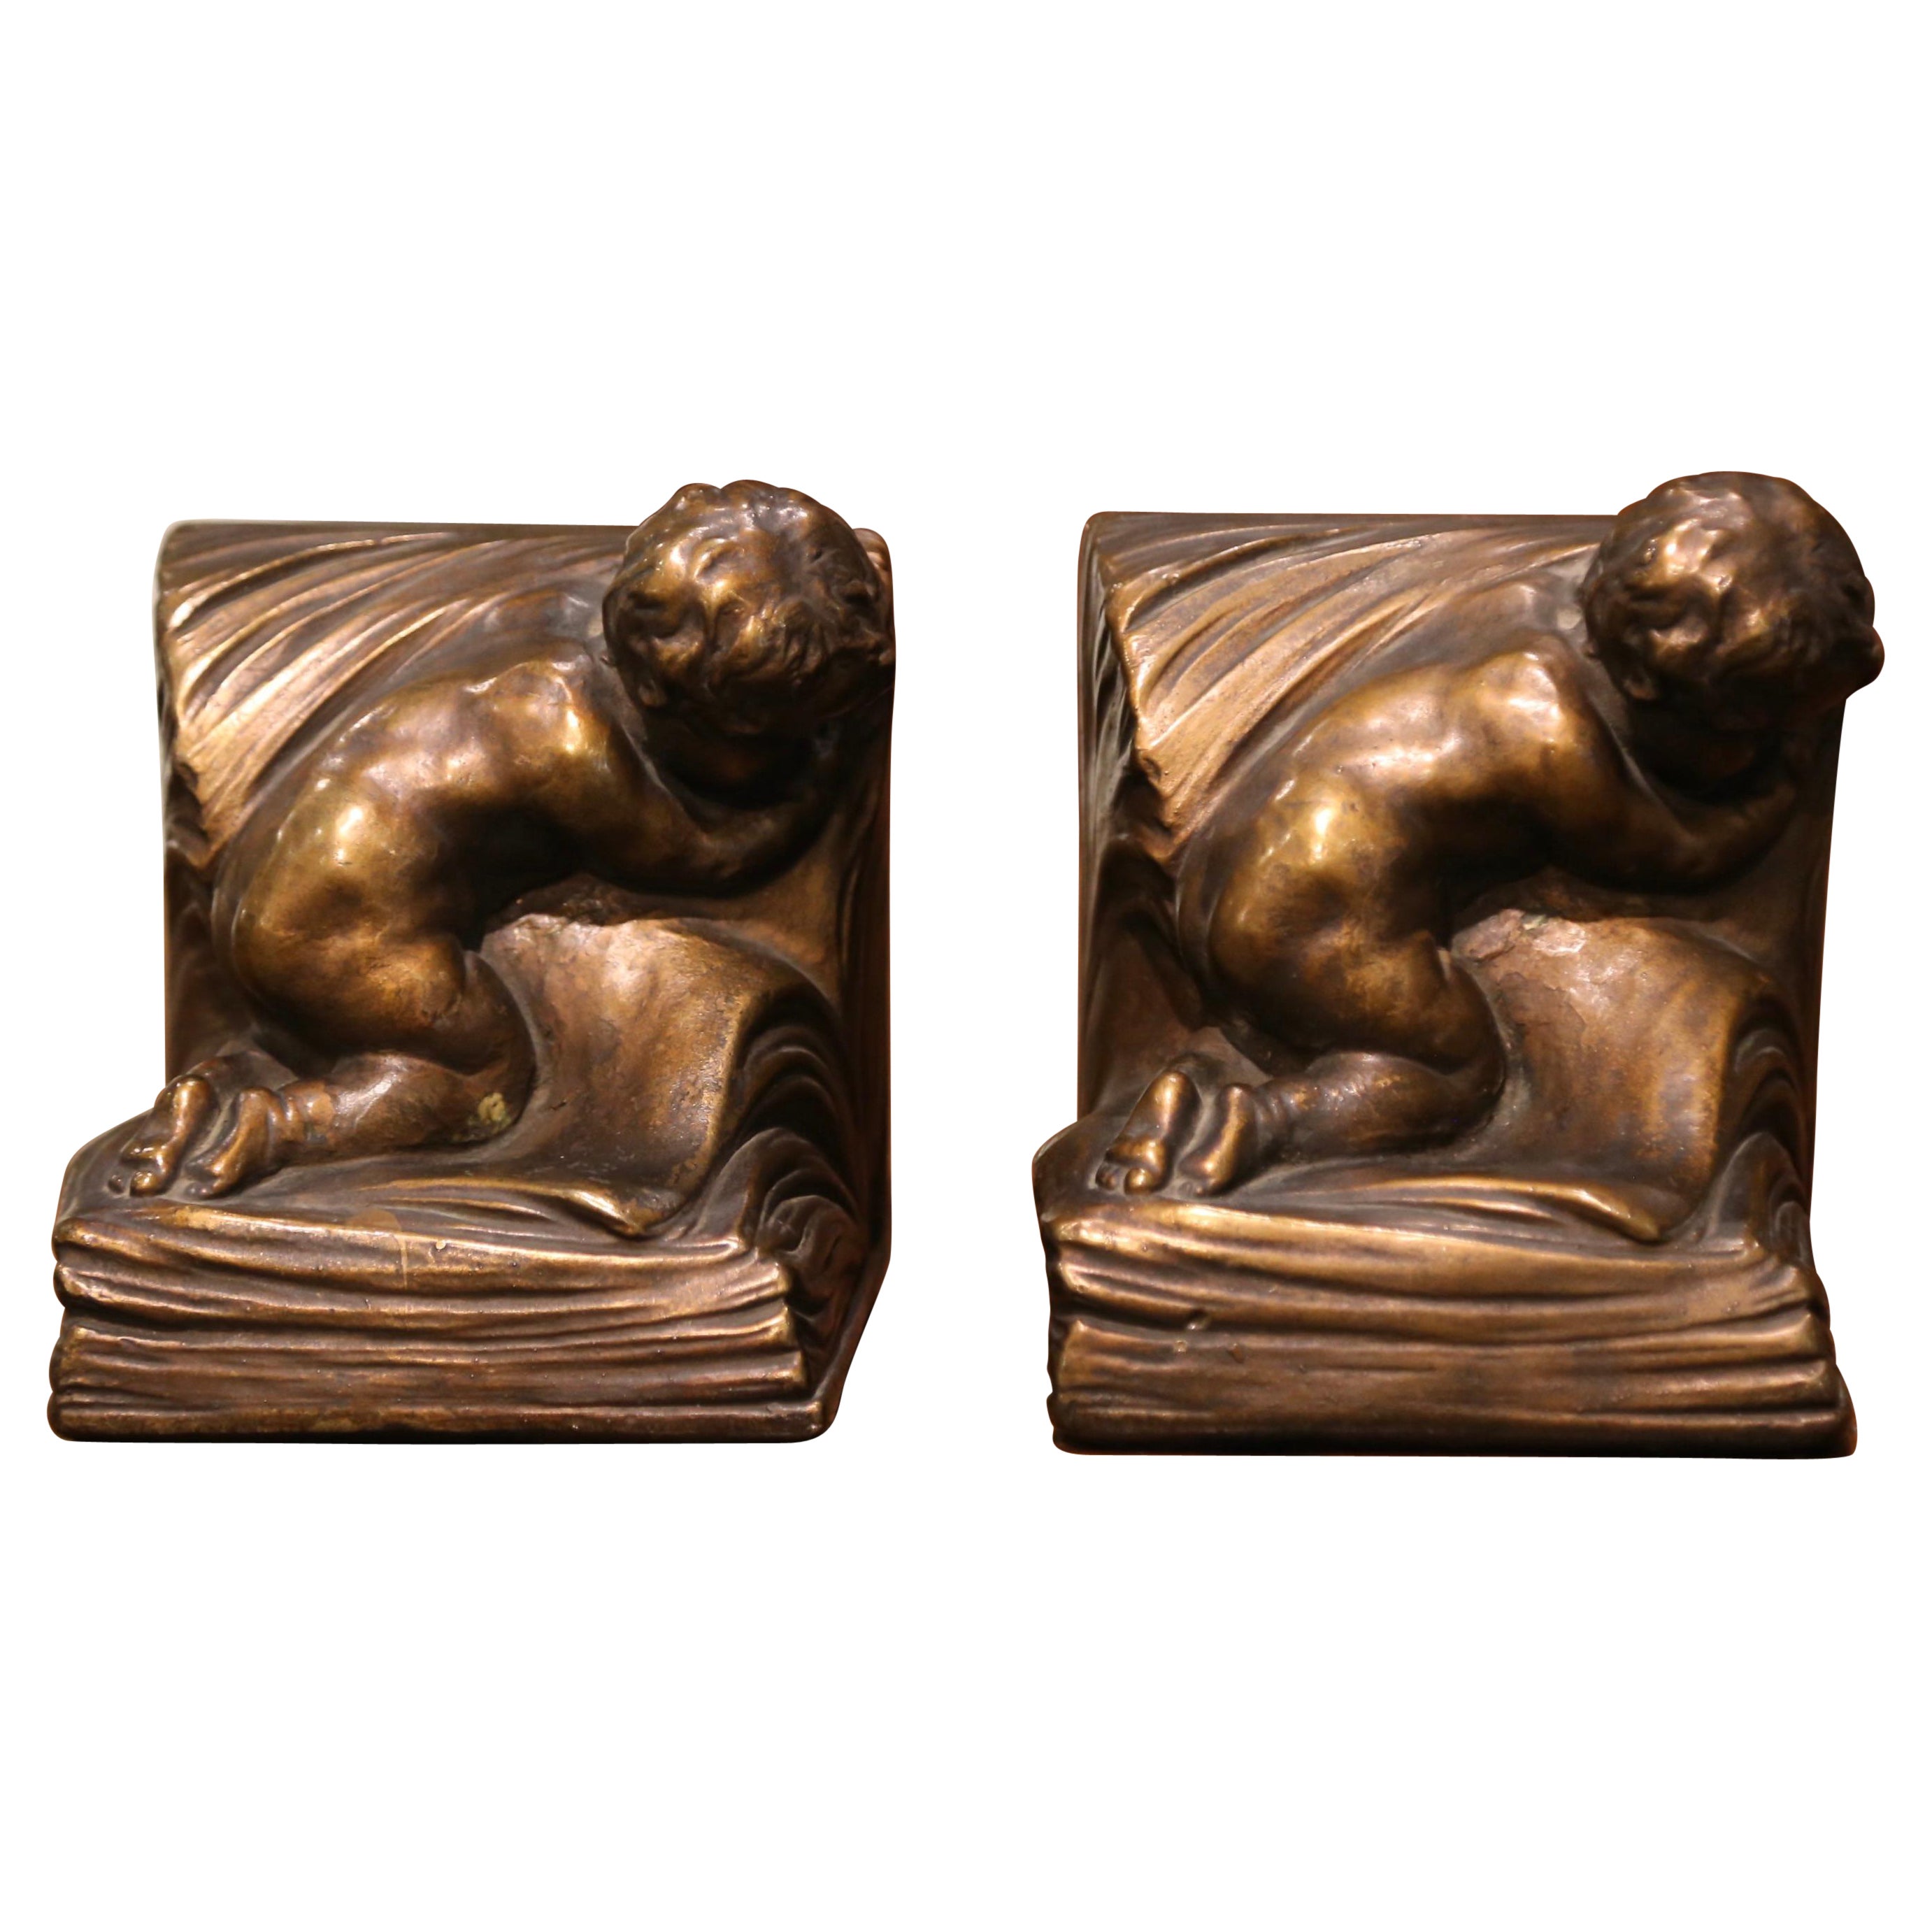 Pair of Patinated Armor Bronze Cherub Bookends Signed and Dated CA Johnson 1914